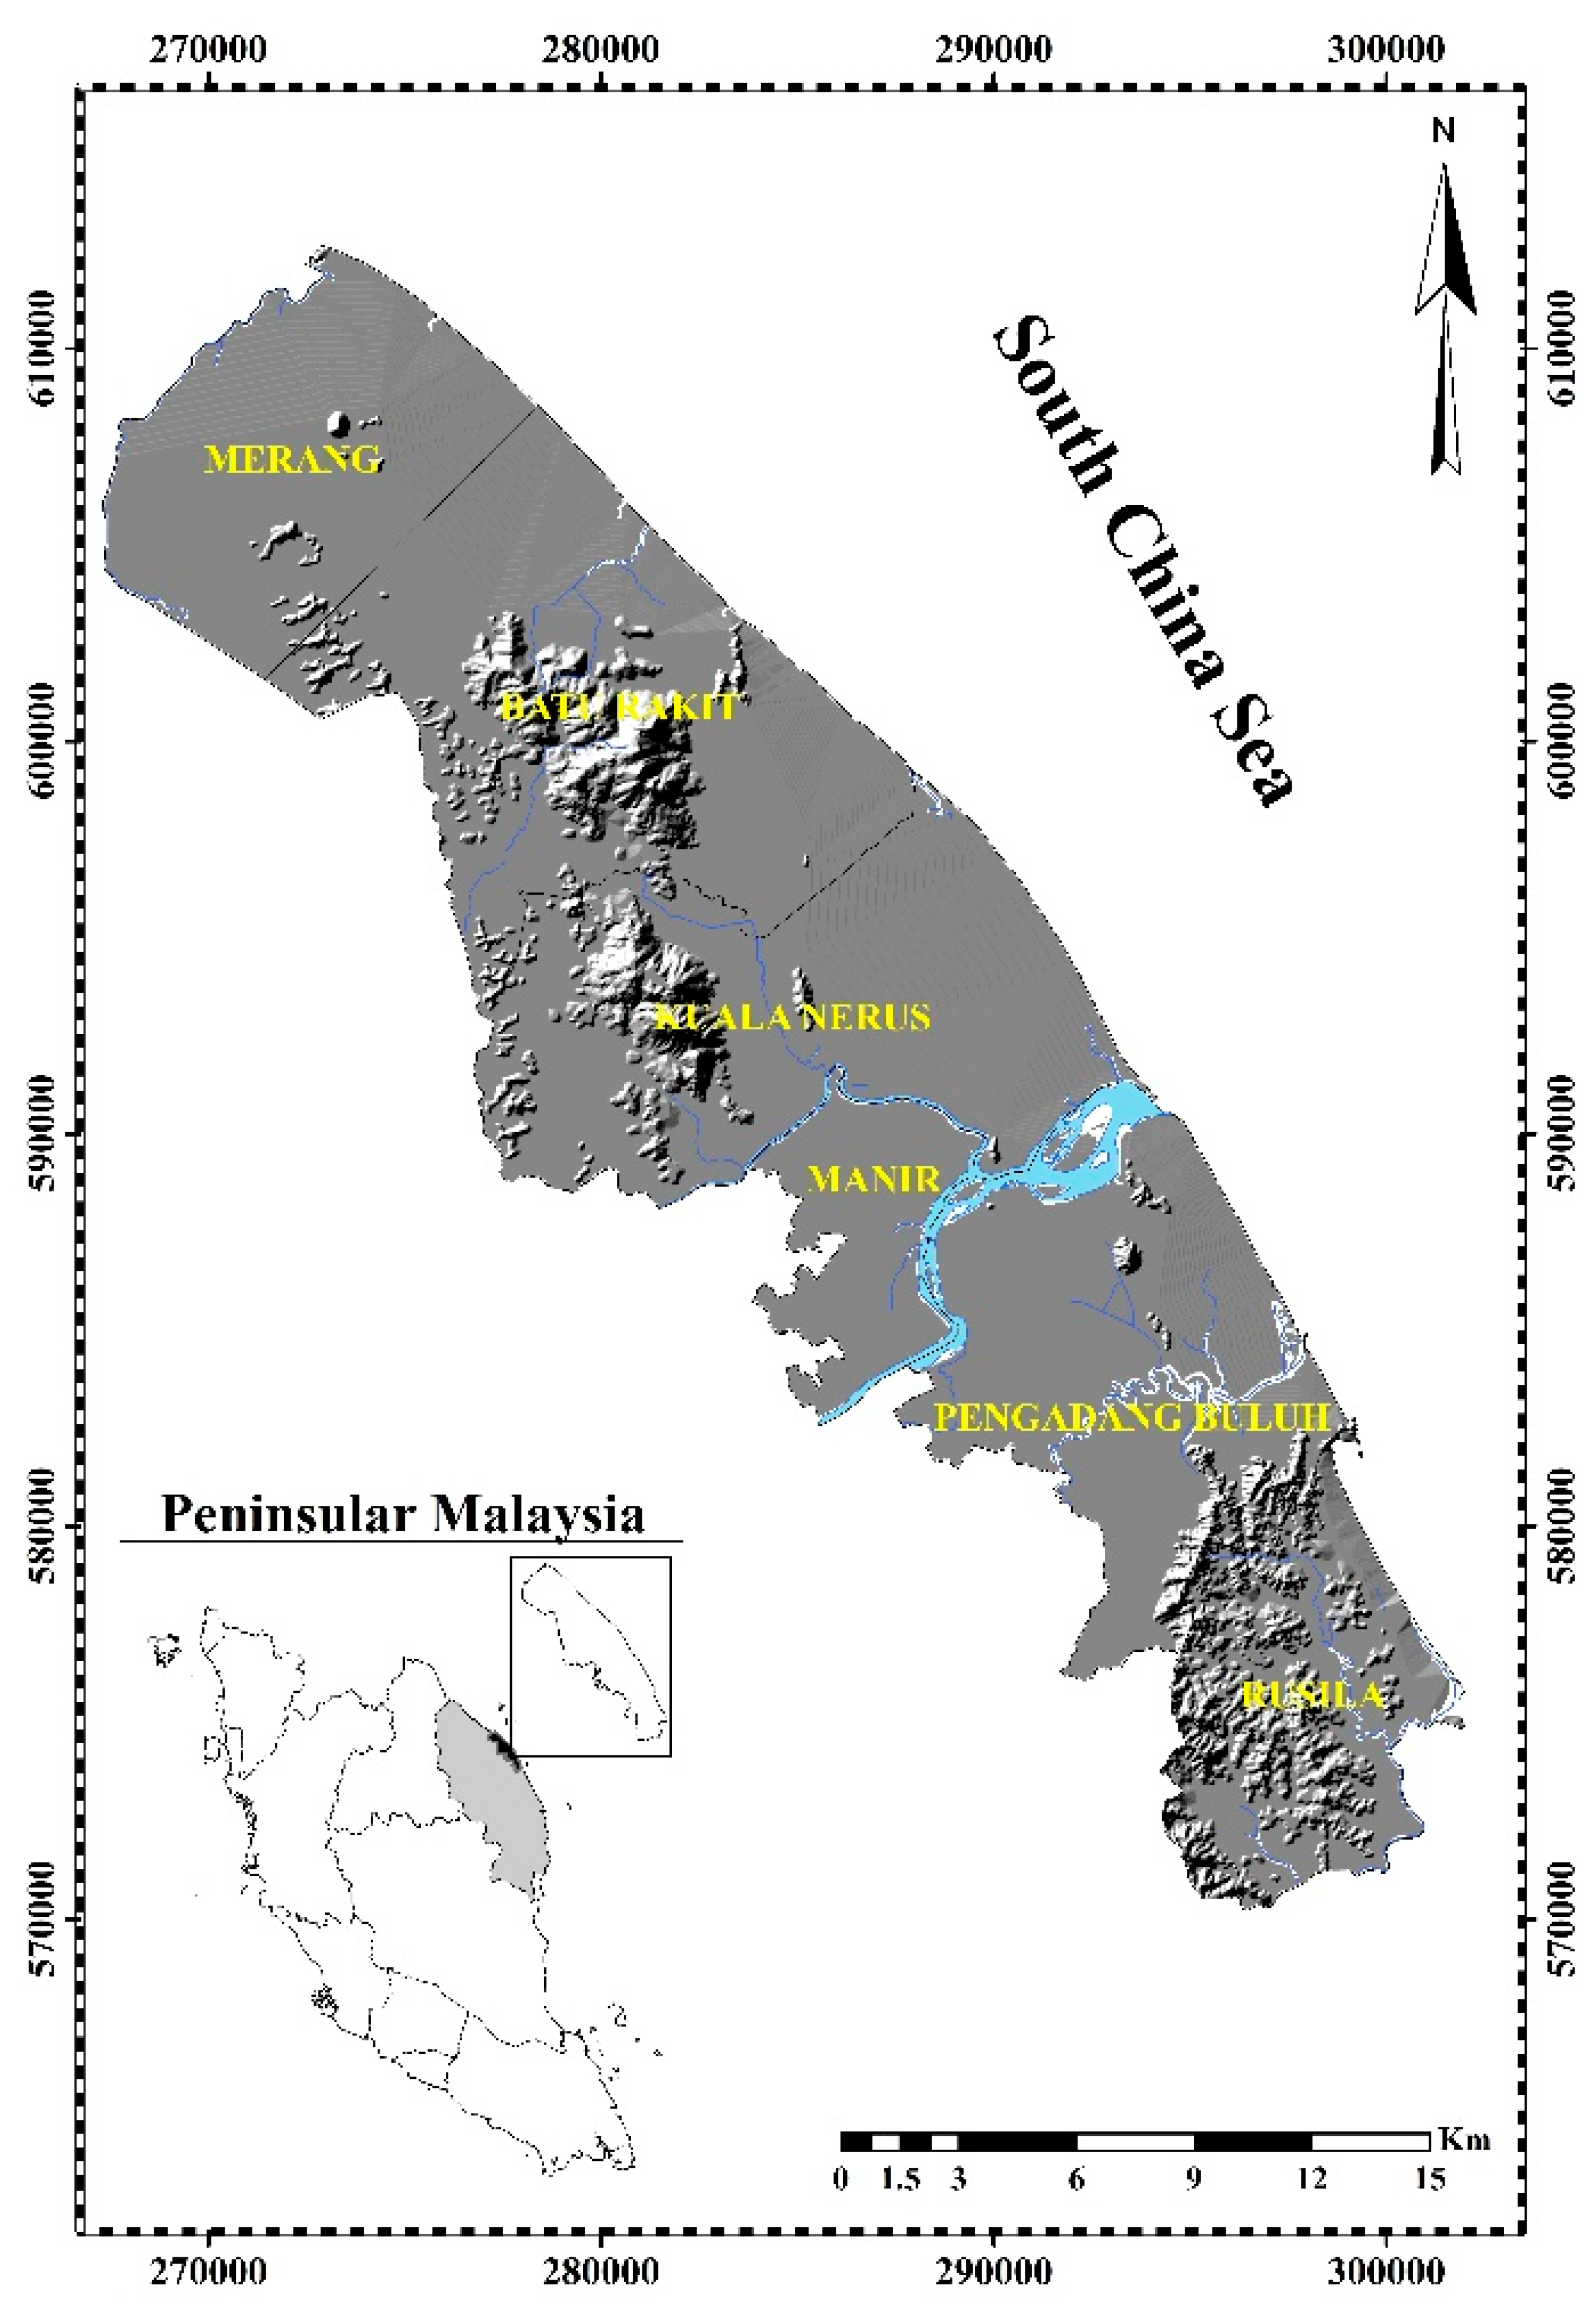 Ijgi Free Full Text Land Use Suitability Assessment Using Delphi And Analytical Hierarchy Process D Ahp Hybrid Model For Coastal City Management Kuala Terengganu Peninsular Malaysia Html